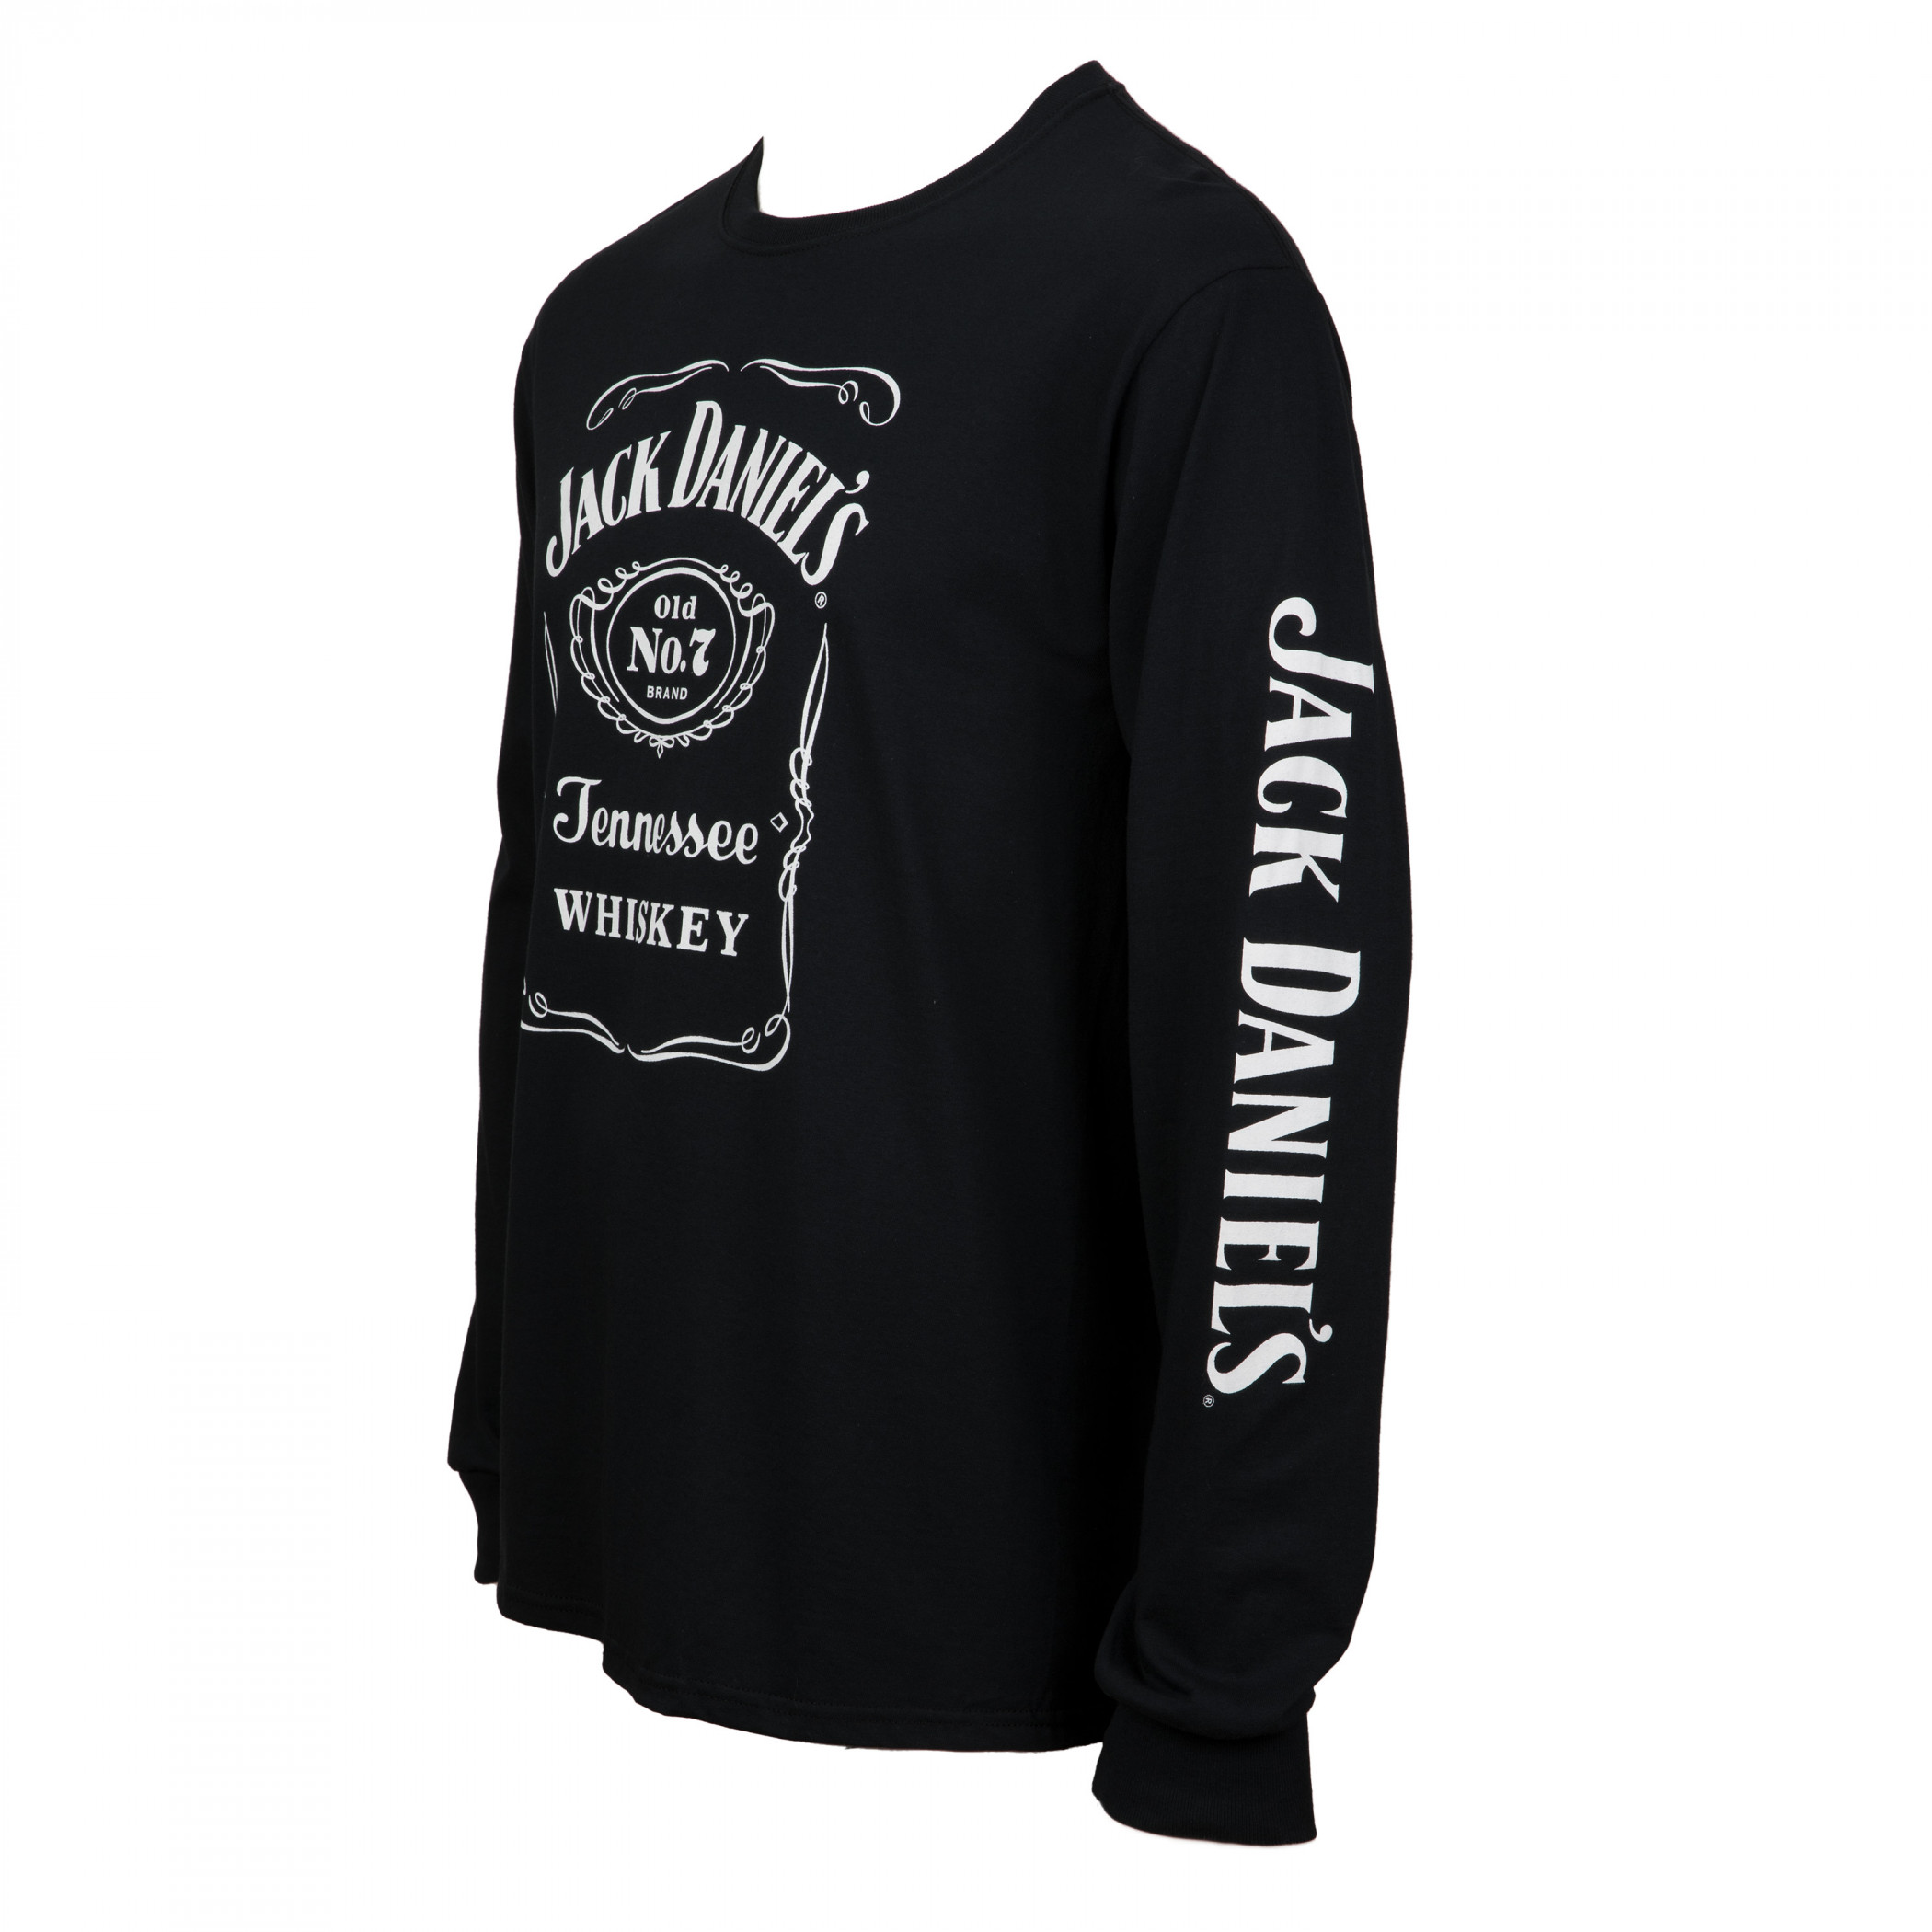 Jack Daniel's Old No.7 Brand Tennessee Whiskey Long Sleeve Shirt